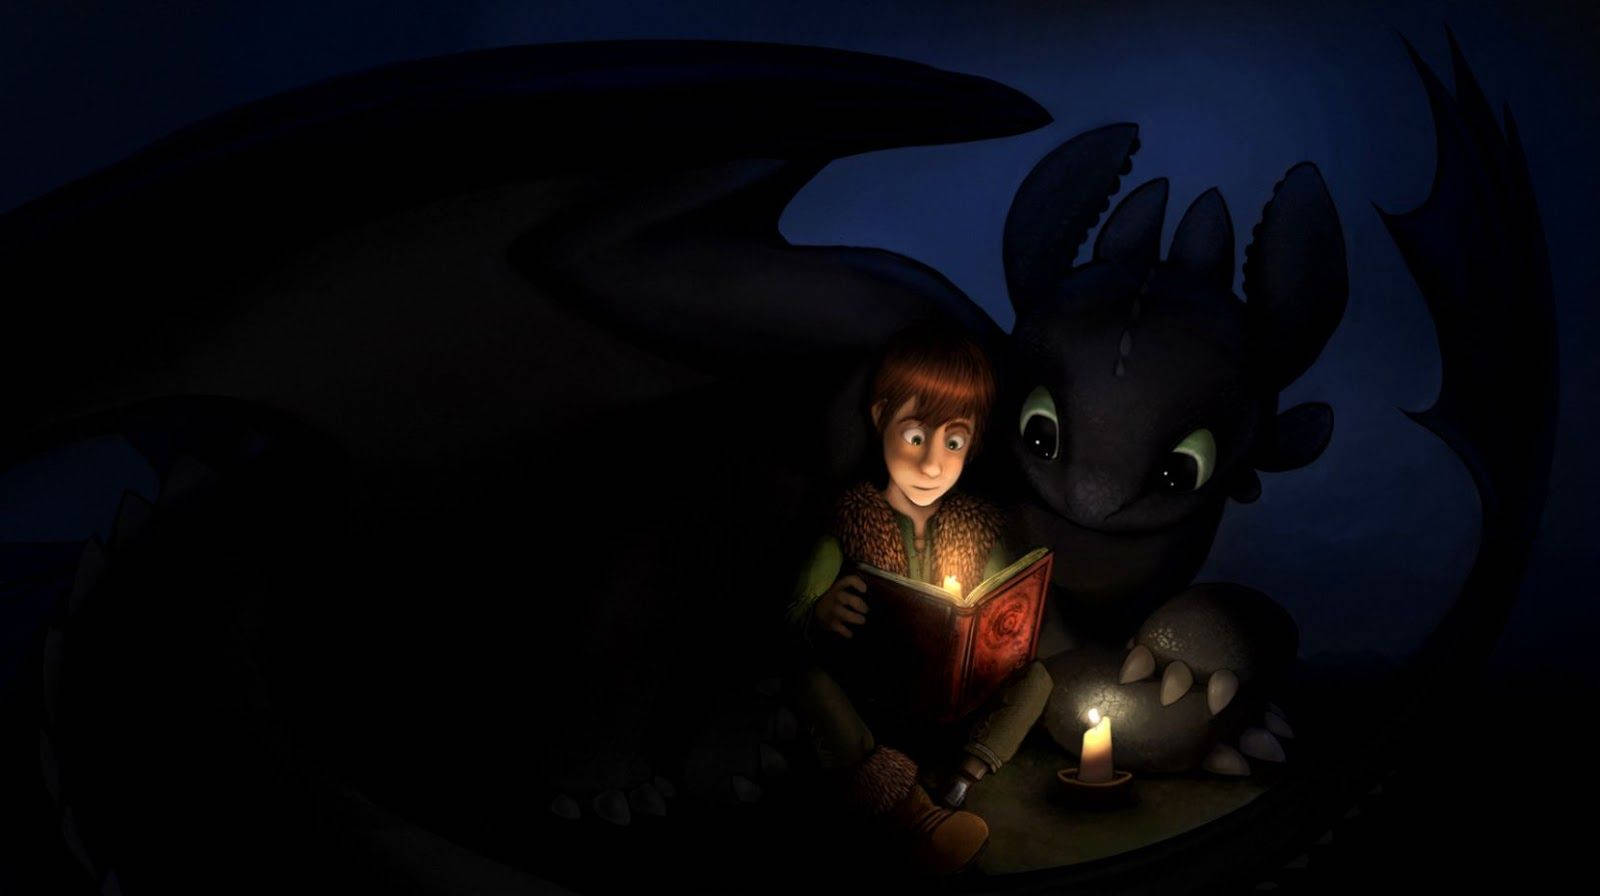 How To Train Your Dragon Hiccup and Toothless in dark night wallpaper.